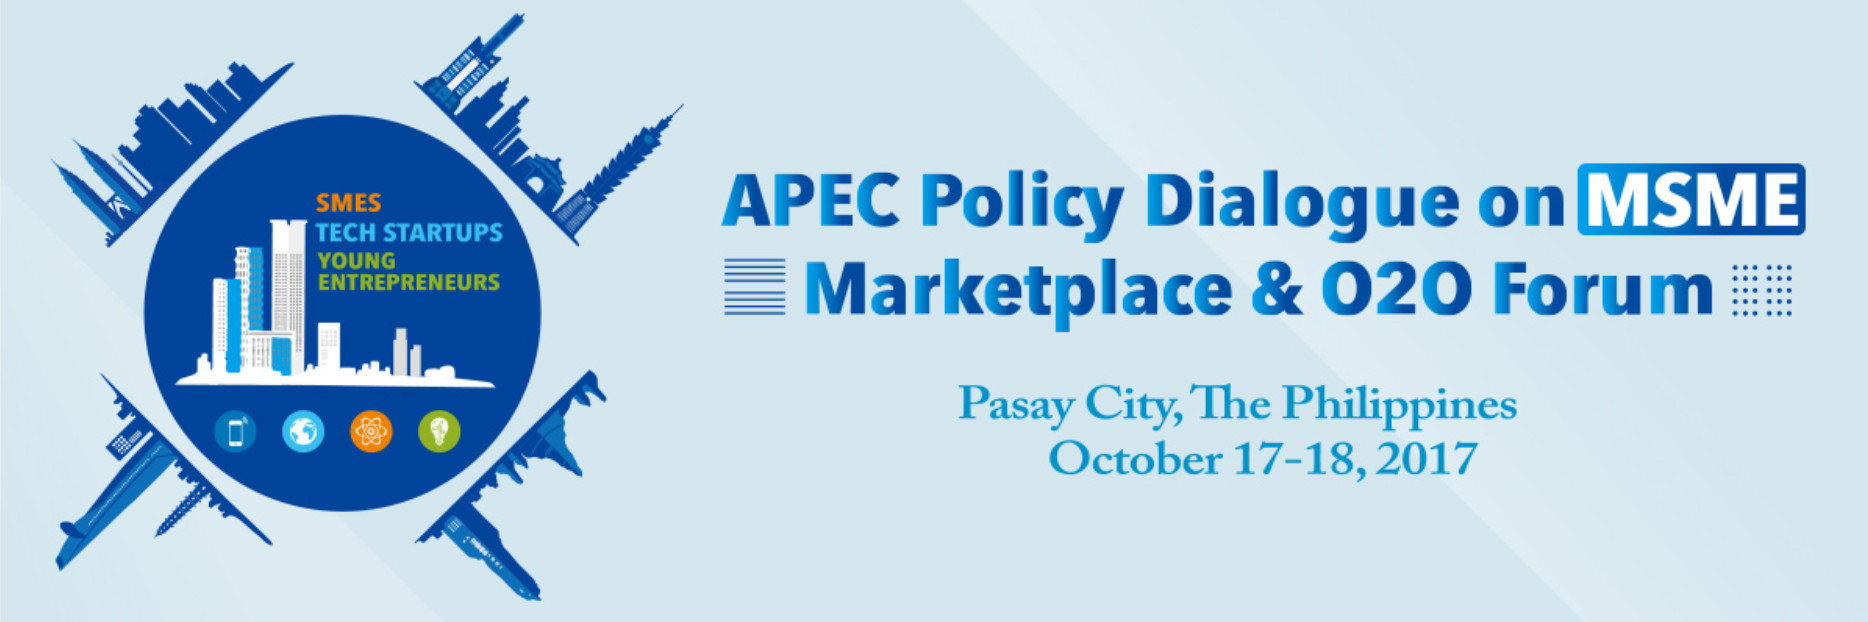 APEC Policy Dialogue on MSME Marketplace & O2O Forum - the PHILIPPINES 2017